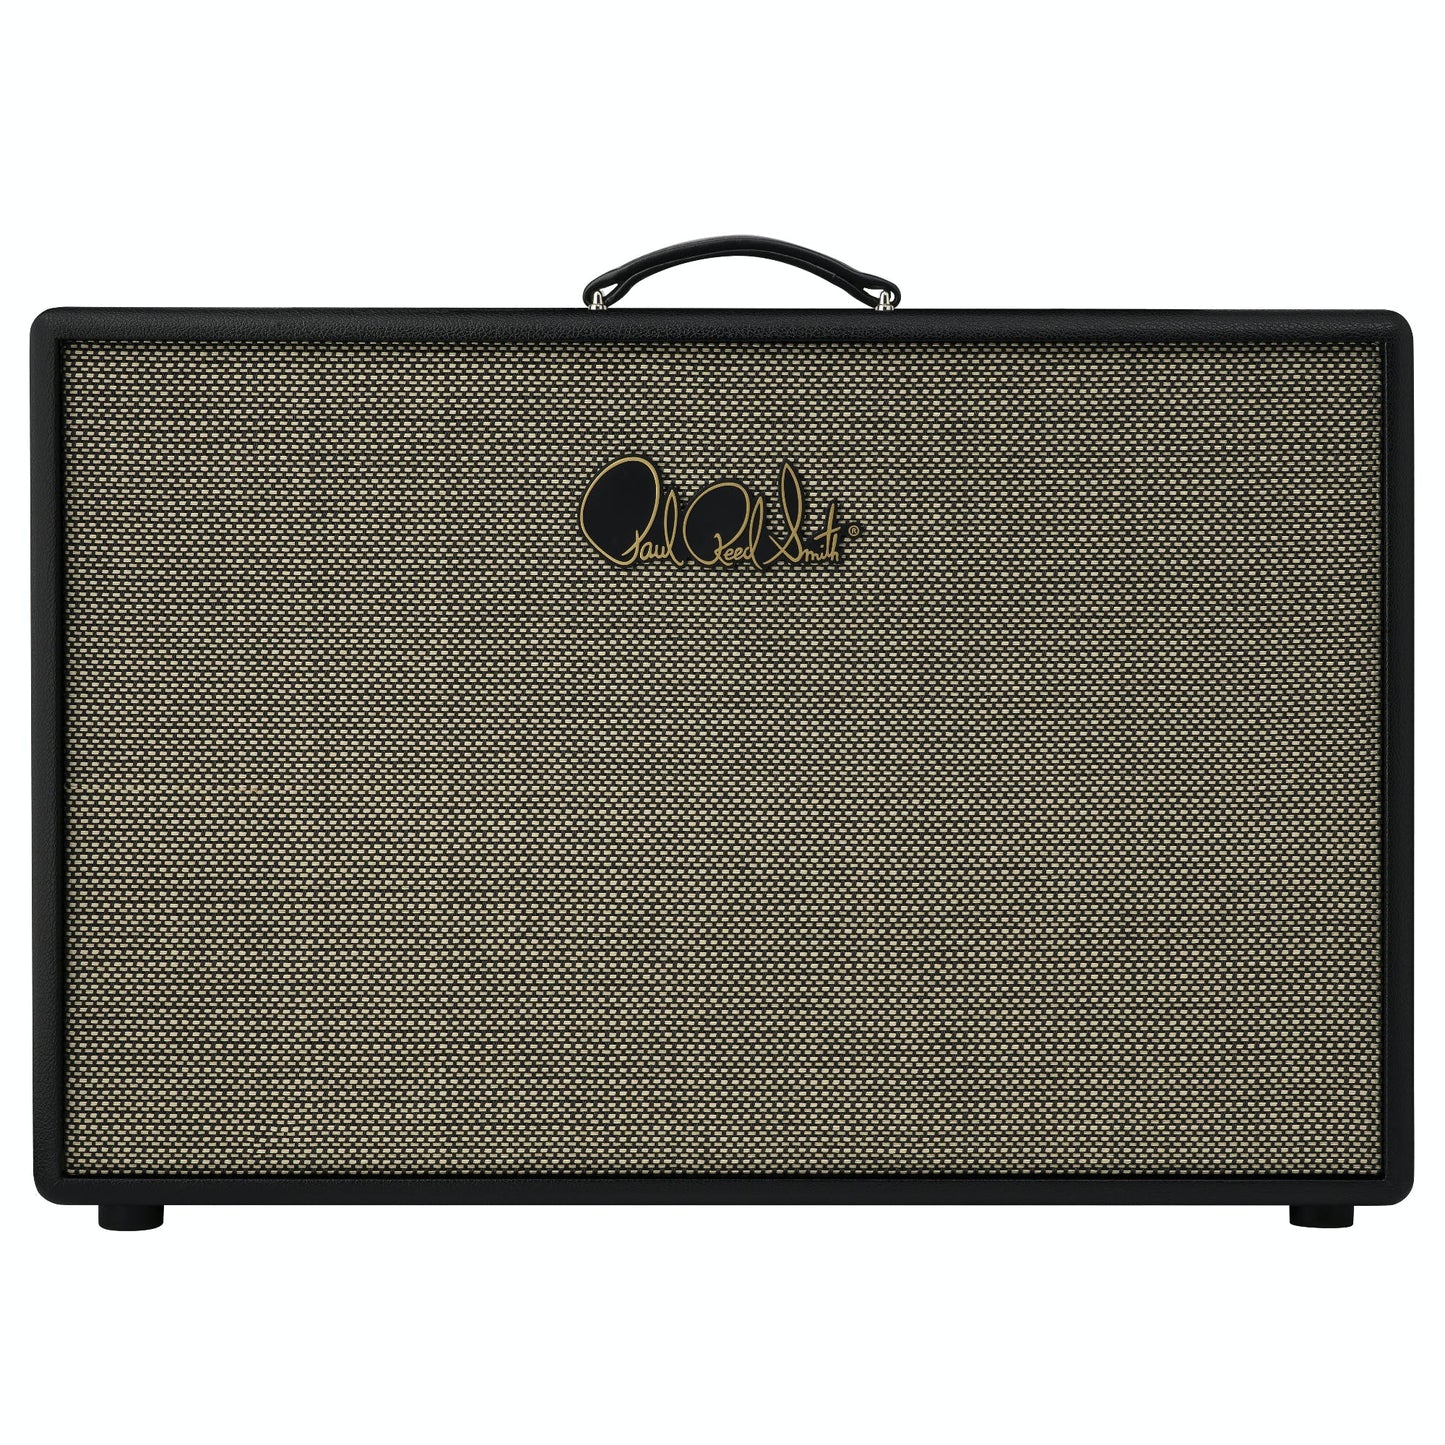 Custom padded cover for PRS HDRX 2x12 Closed-back Cabinet